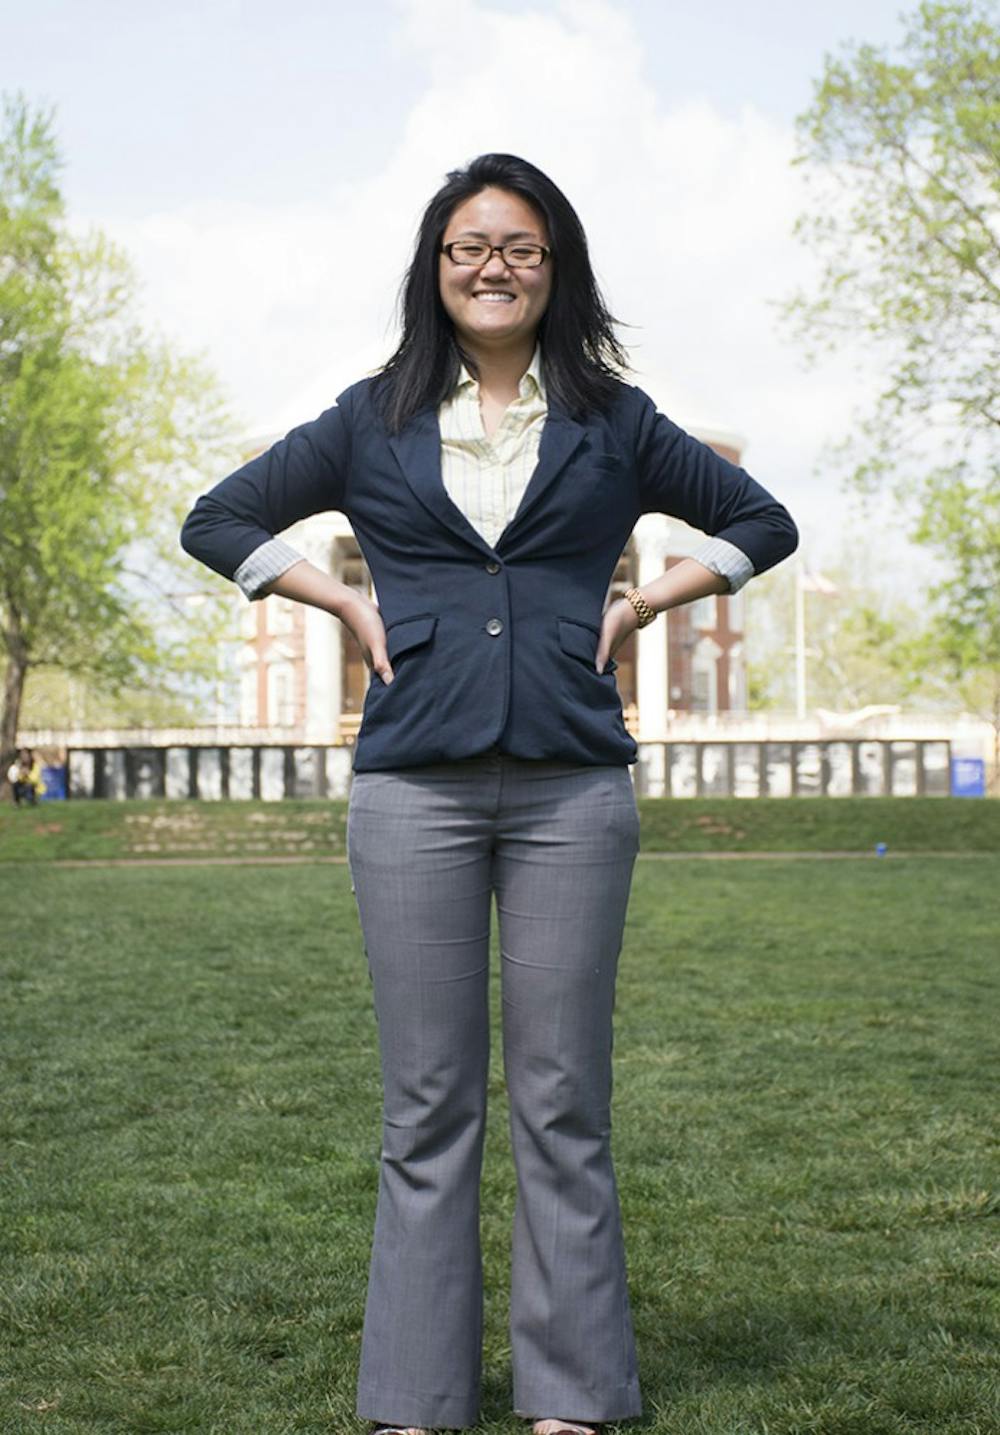 Annie Miao&nbsp;dreamed of going to college when she was 17 years old.